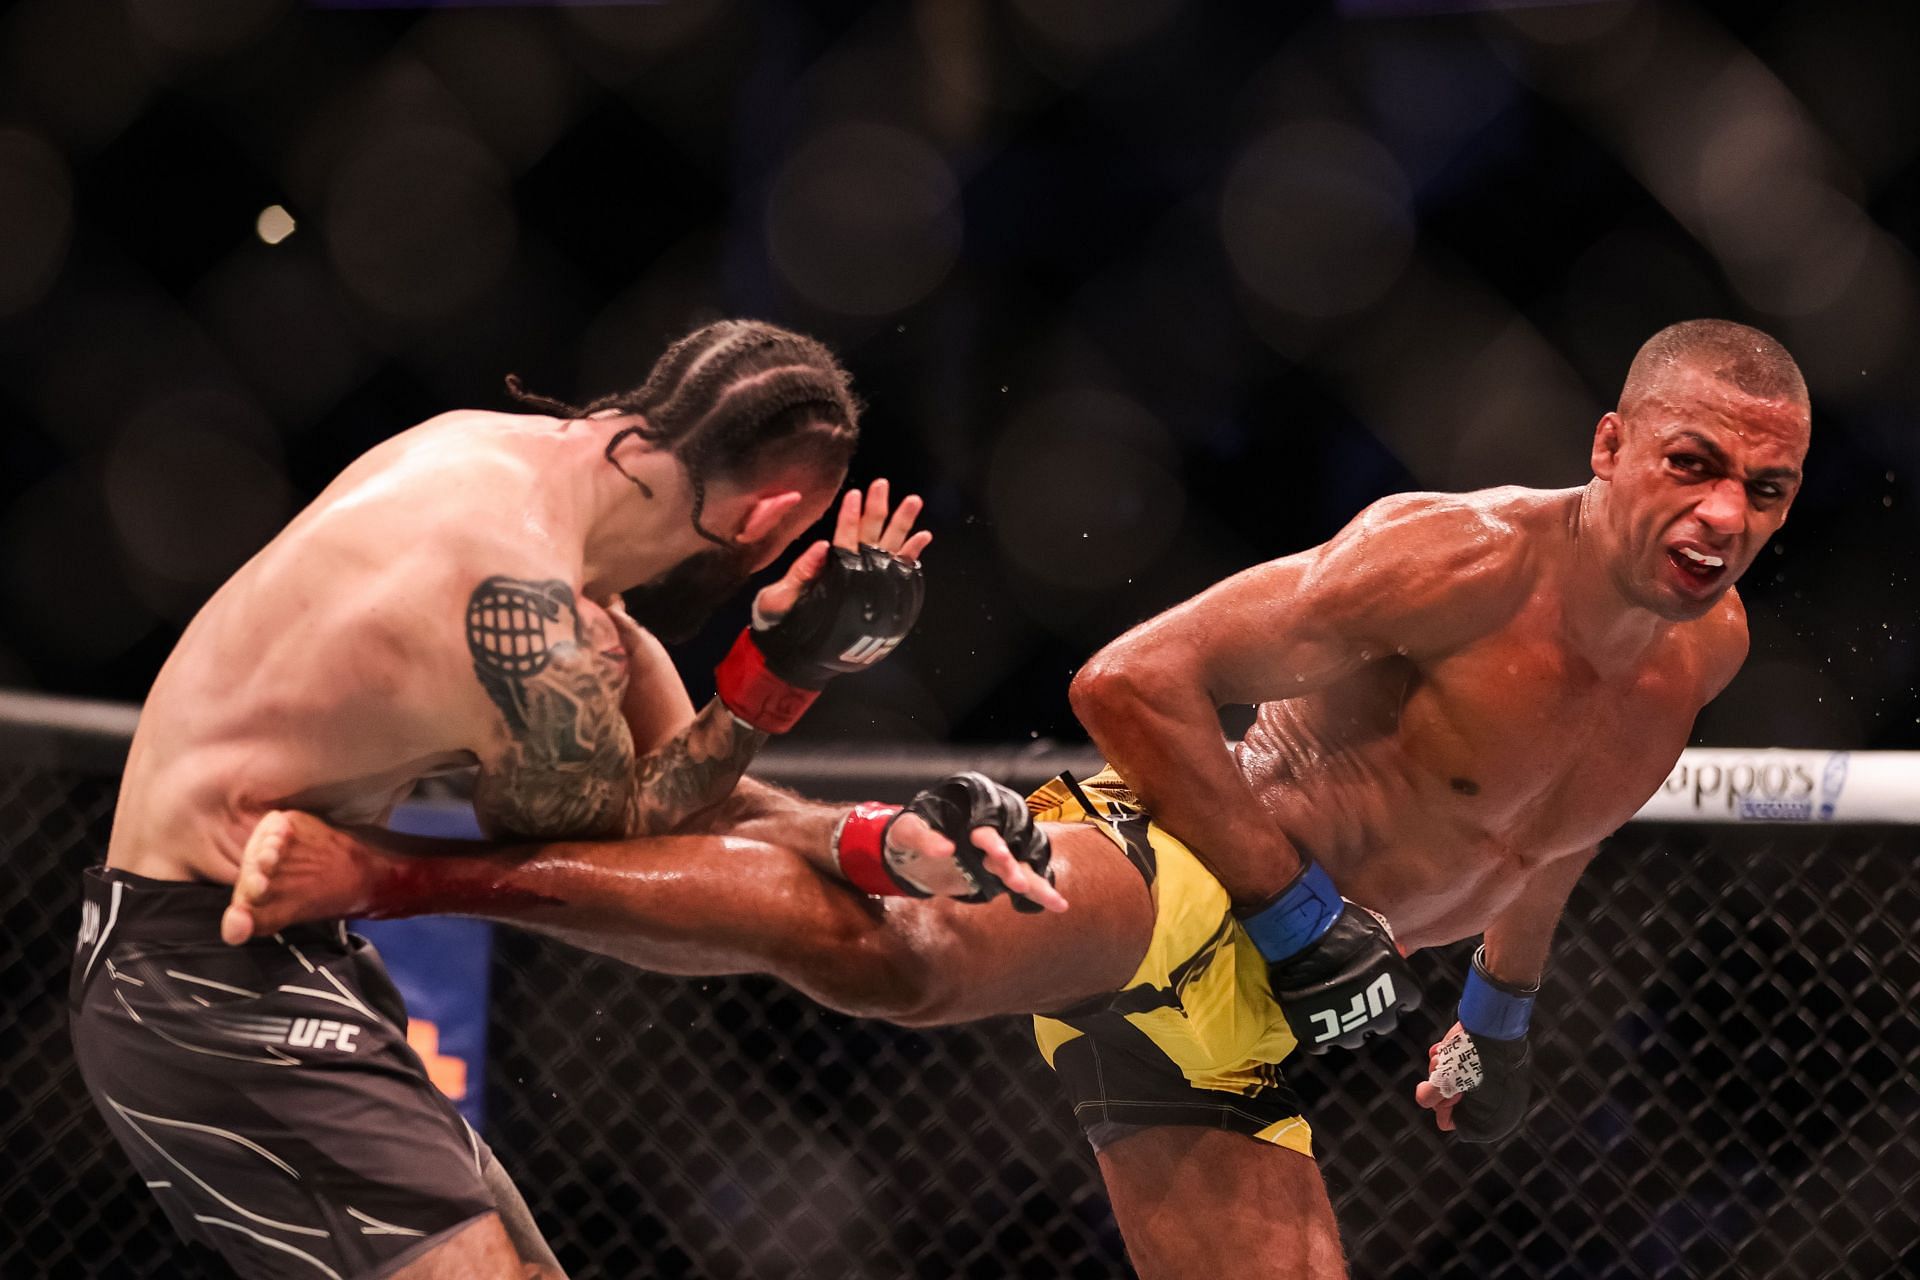 Edson Barboza has the ability to steal the show whenever he fights